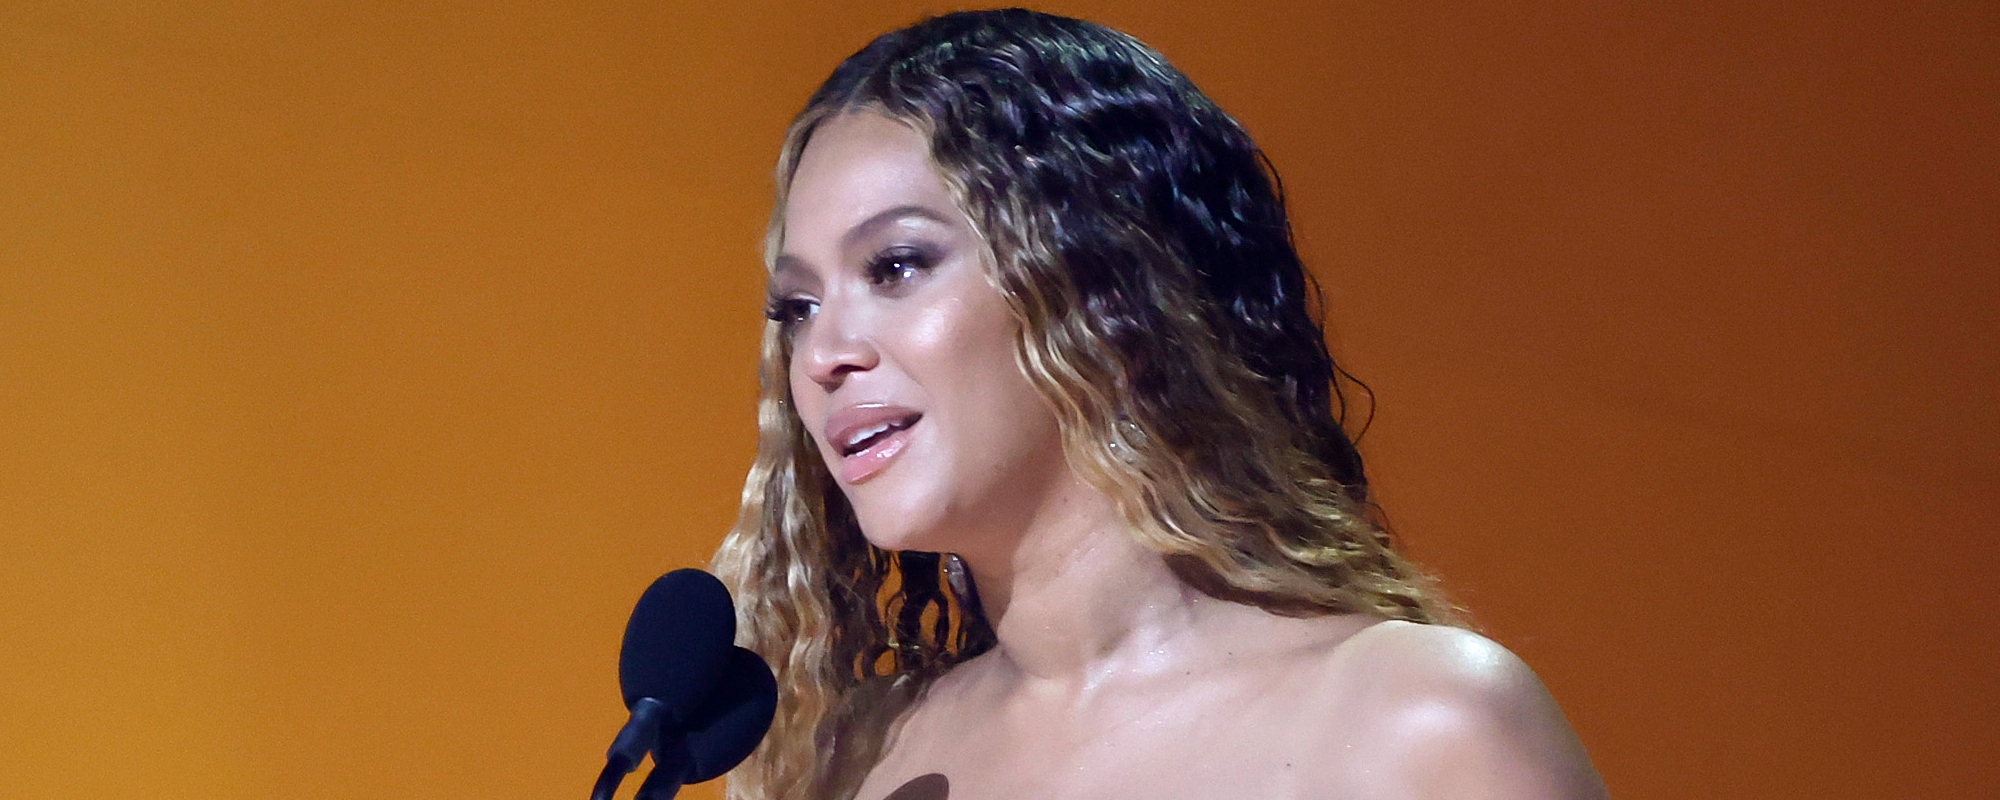 LOOK: Beyoncé Celebrates Valentine’s Day With a Little Bit of Country and a lot of ”Love”